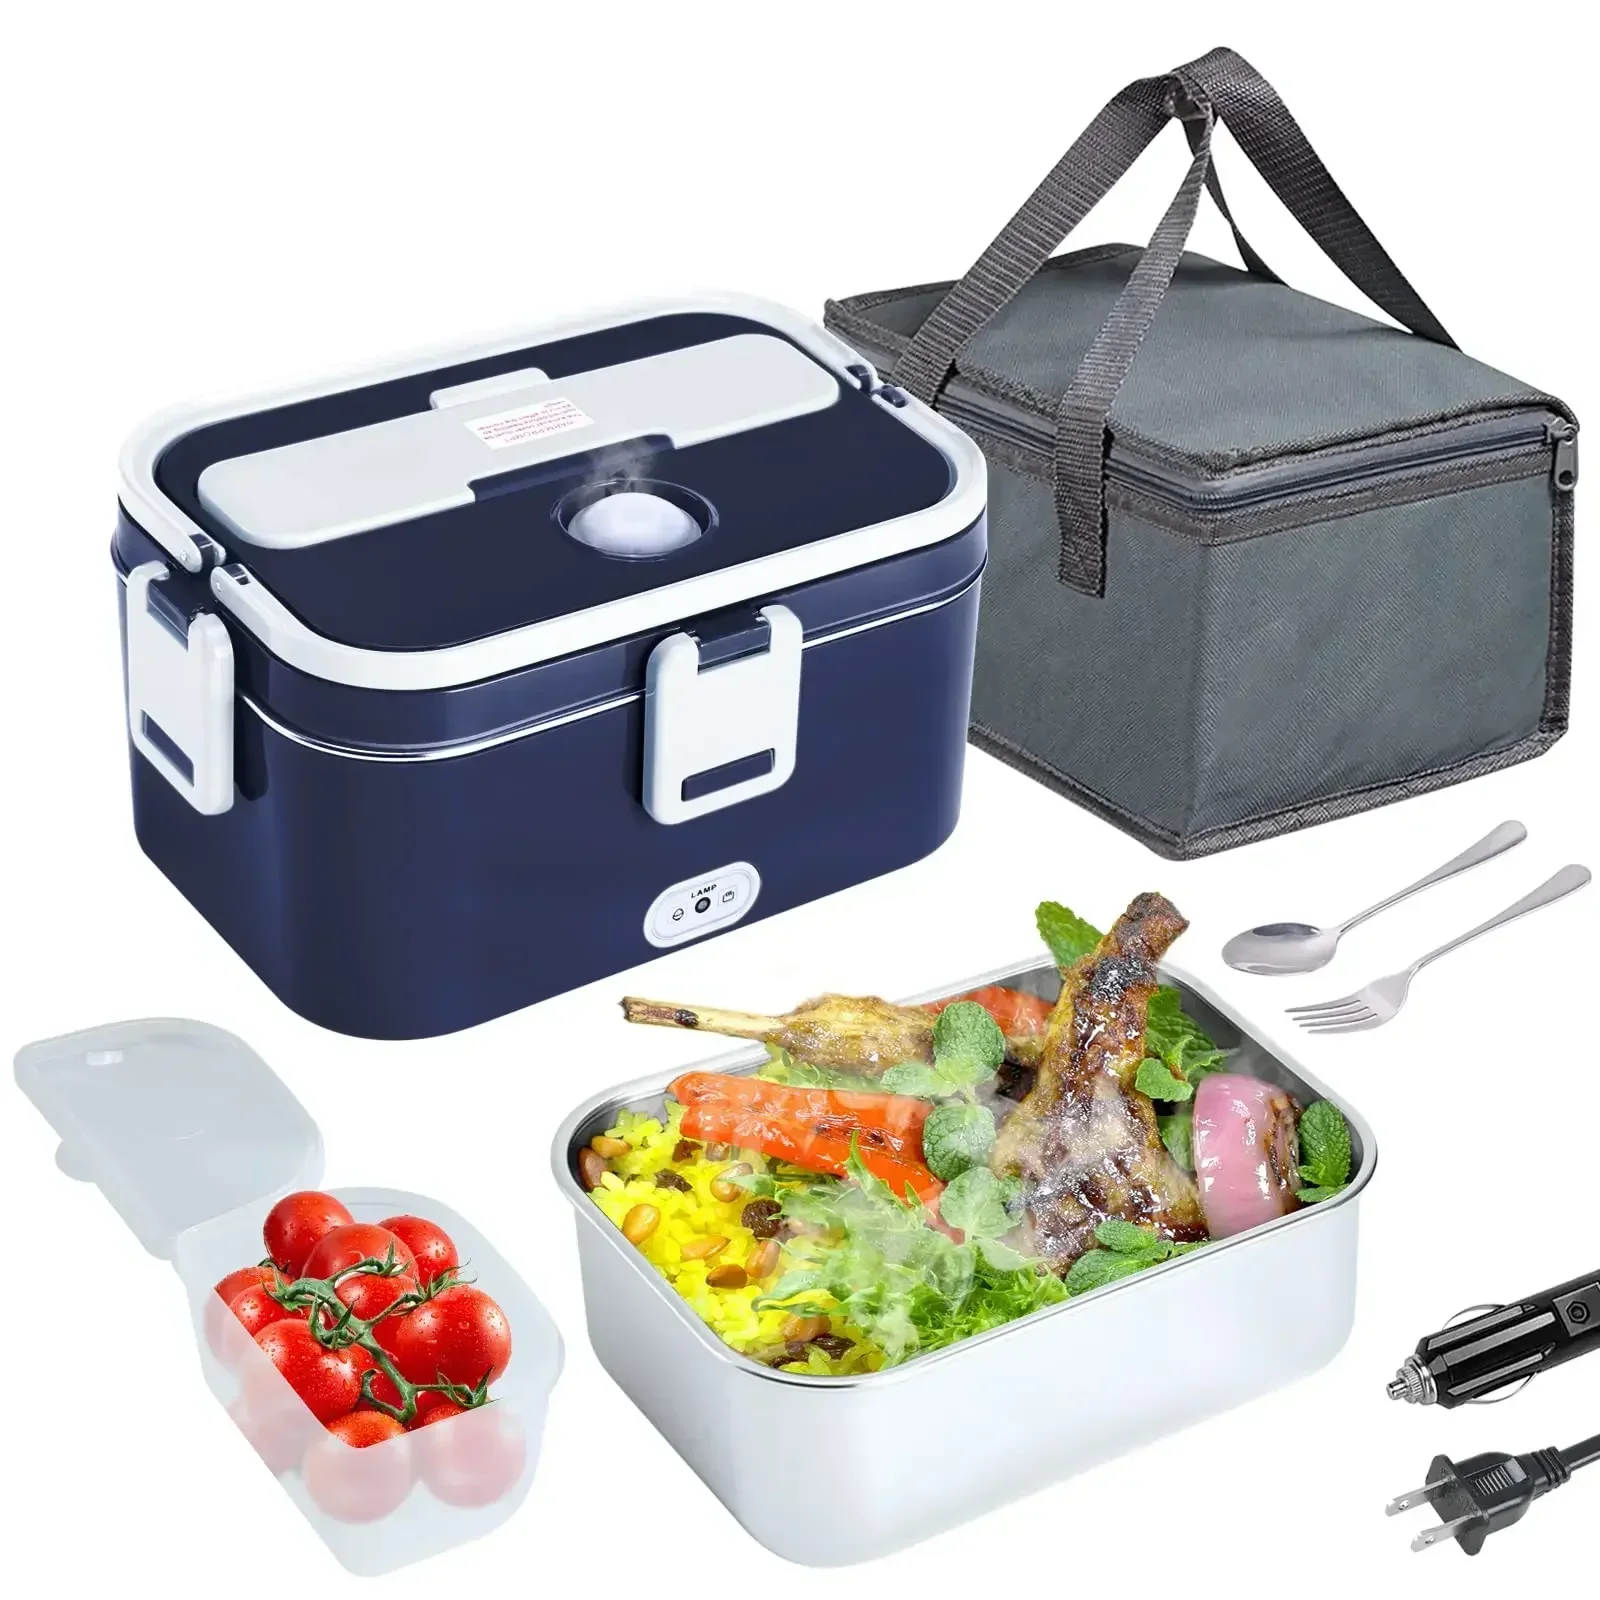 https://ae01.alicdn.com/kf/S244ac355a24d405d95657cb71fc7ebebD/Electric-Lunch-Box-80W-Food-Warmer-Heater-Lunch-Boxes-for-Adults-for-Car-Truck-Portable-Food.jpg